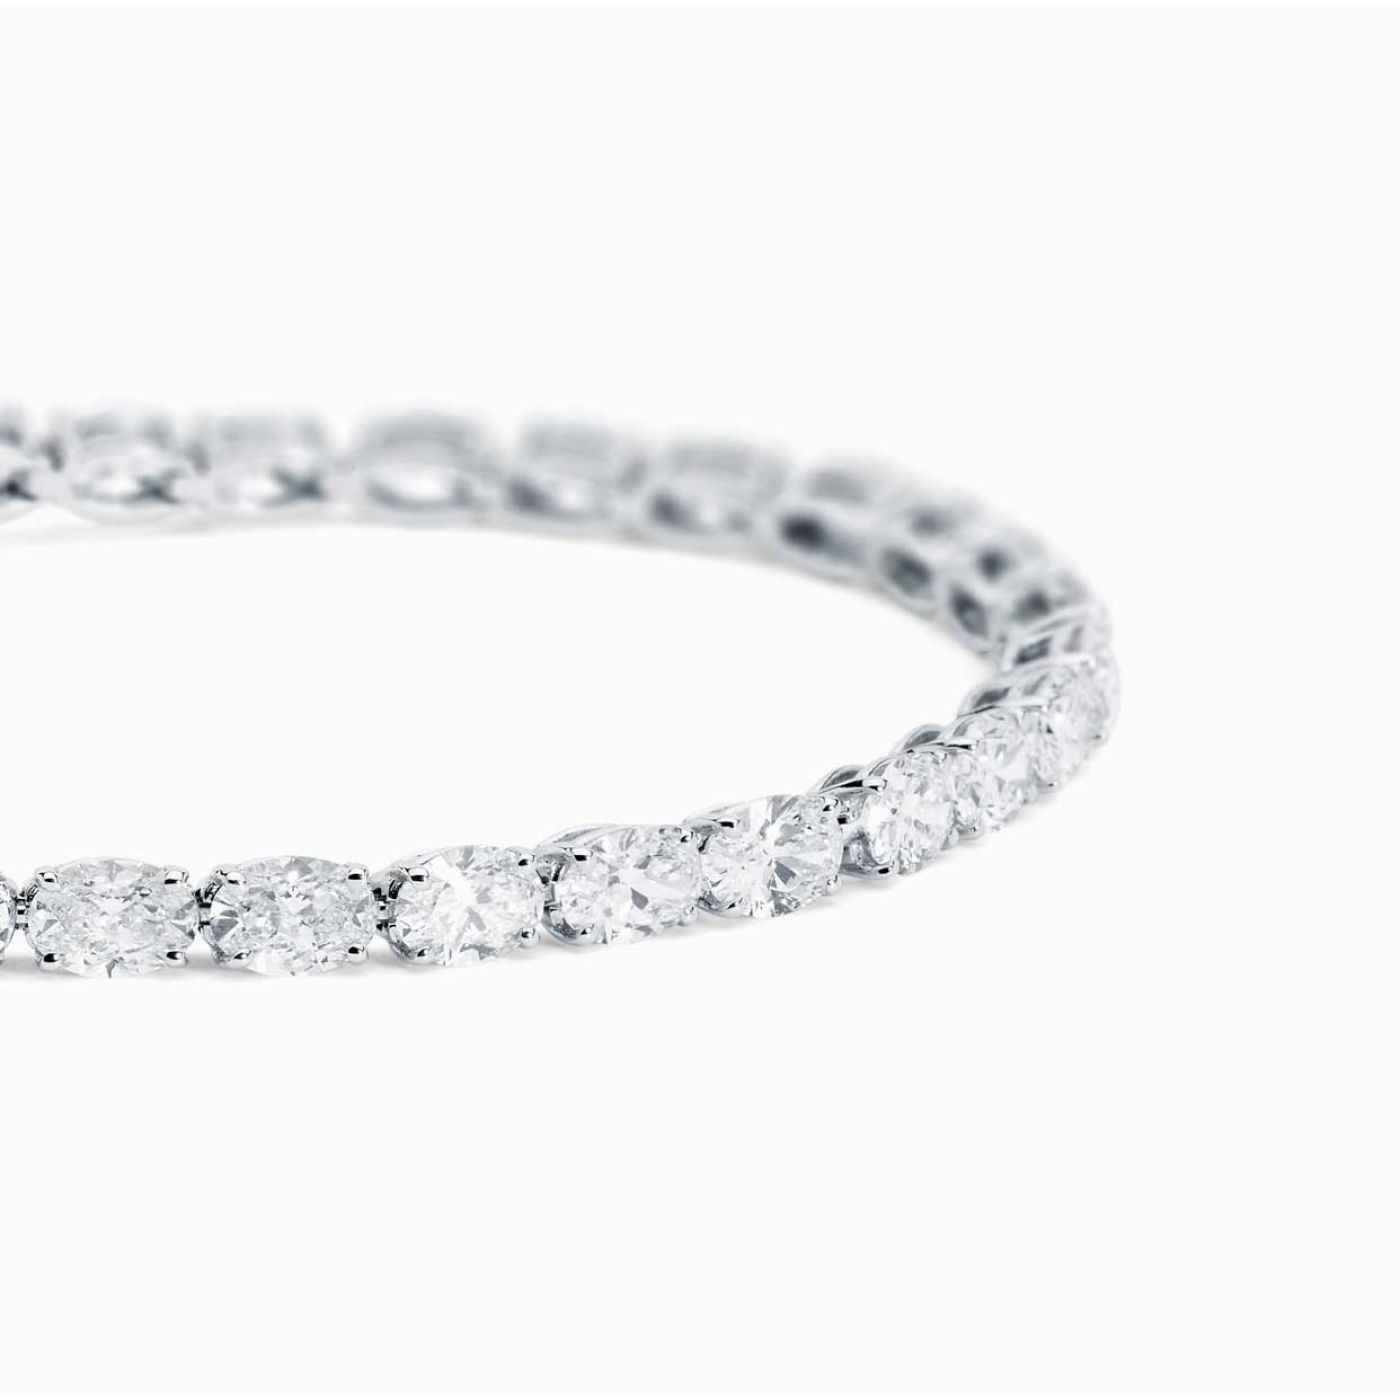 White gold and diamonds riviere bracelet